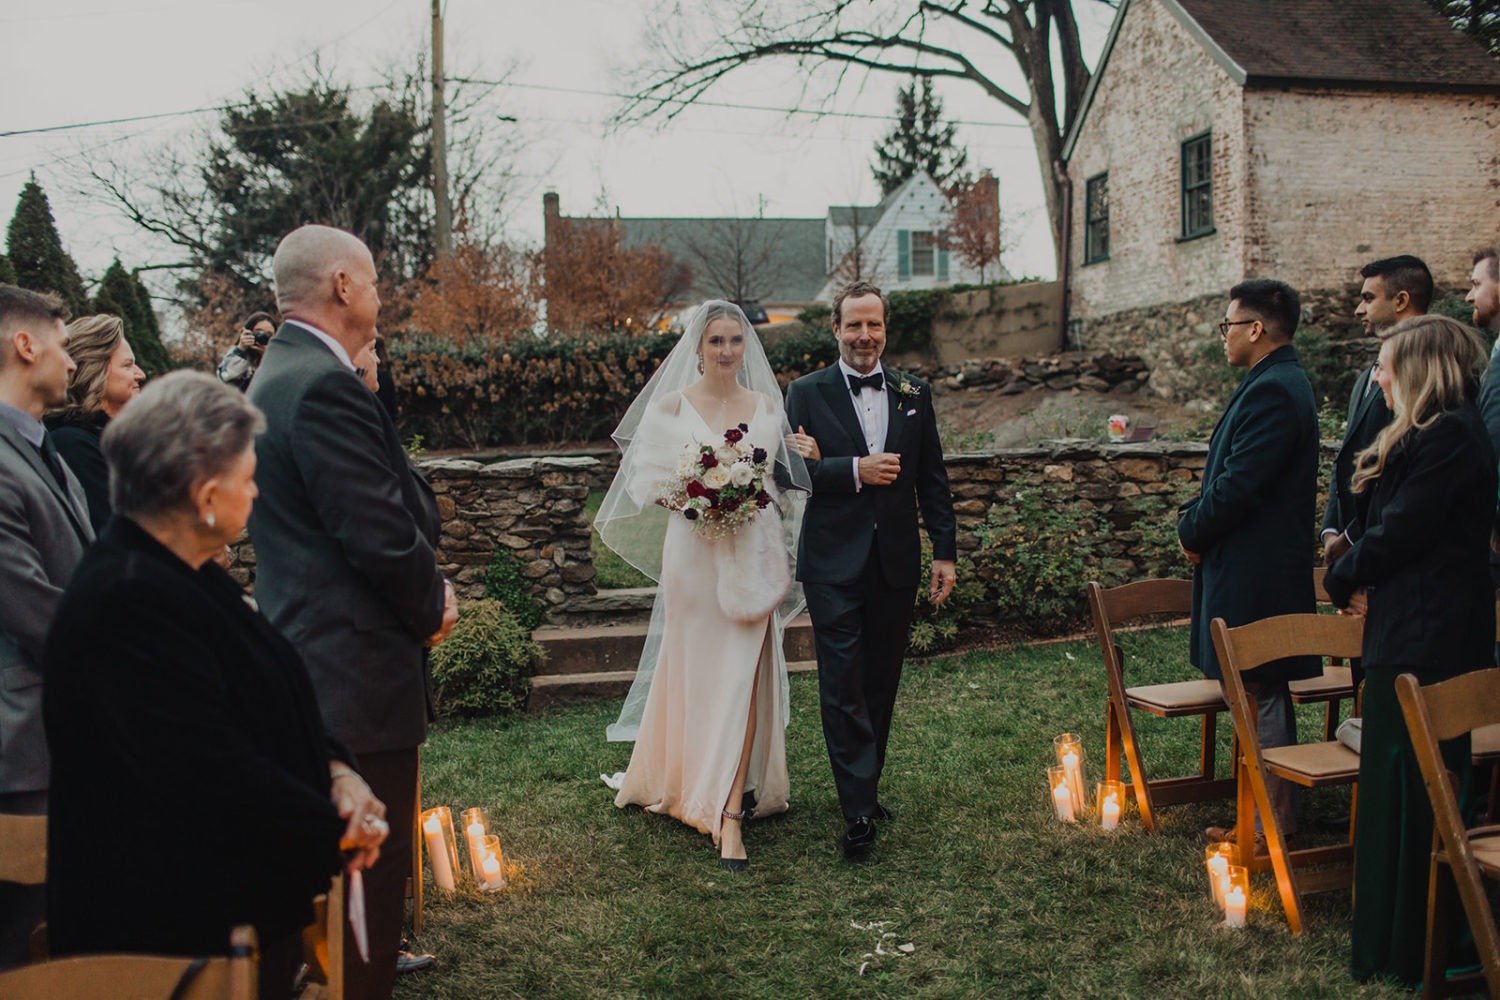 Bride walks down aisle with dad at intimate wedding